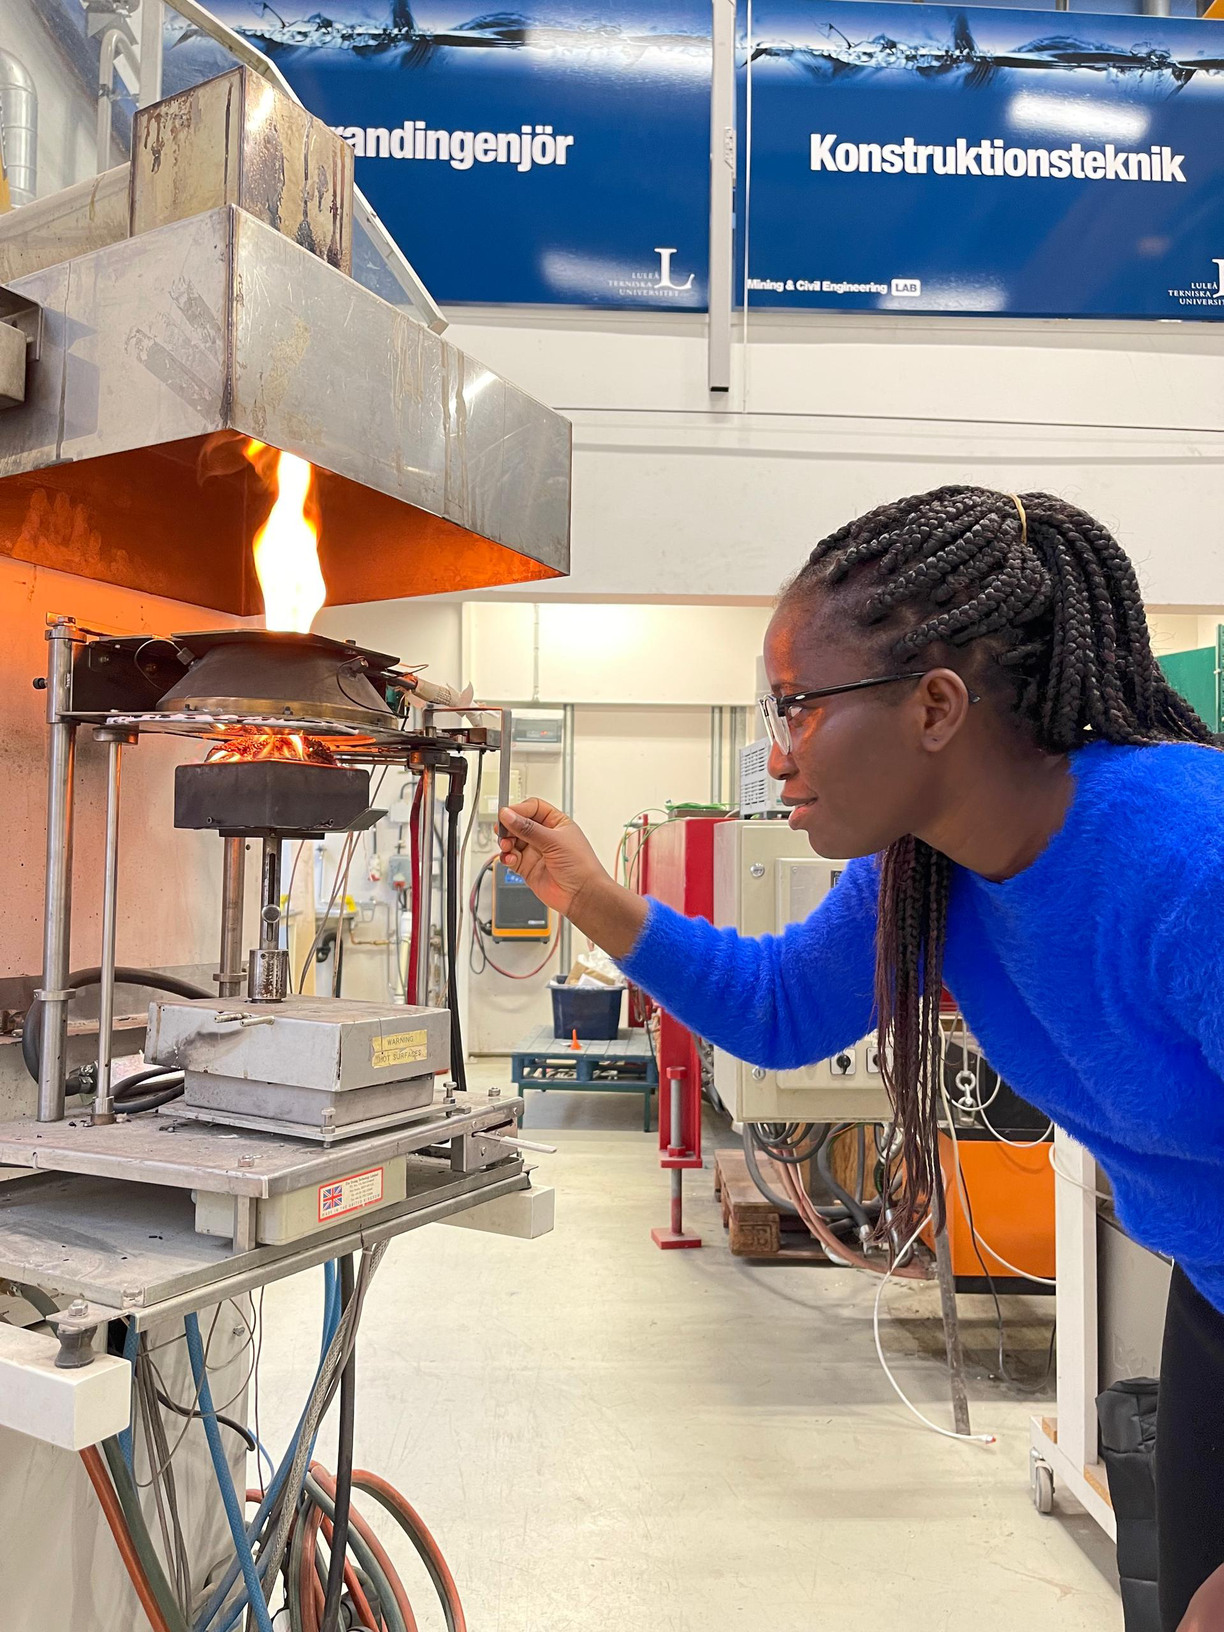 Fire Testing with the Cone Calorimeter